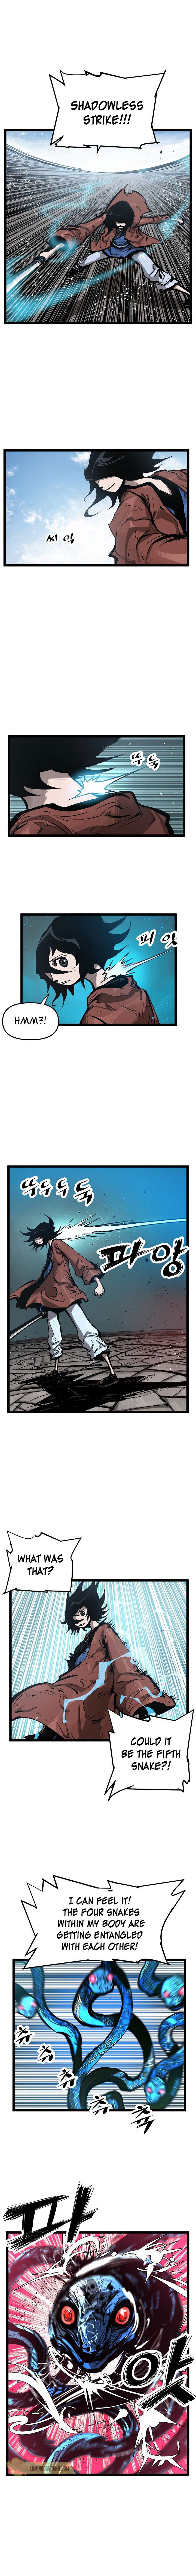 Martial Artist Lee Gwak Chapter 20 page 6